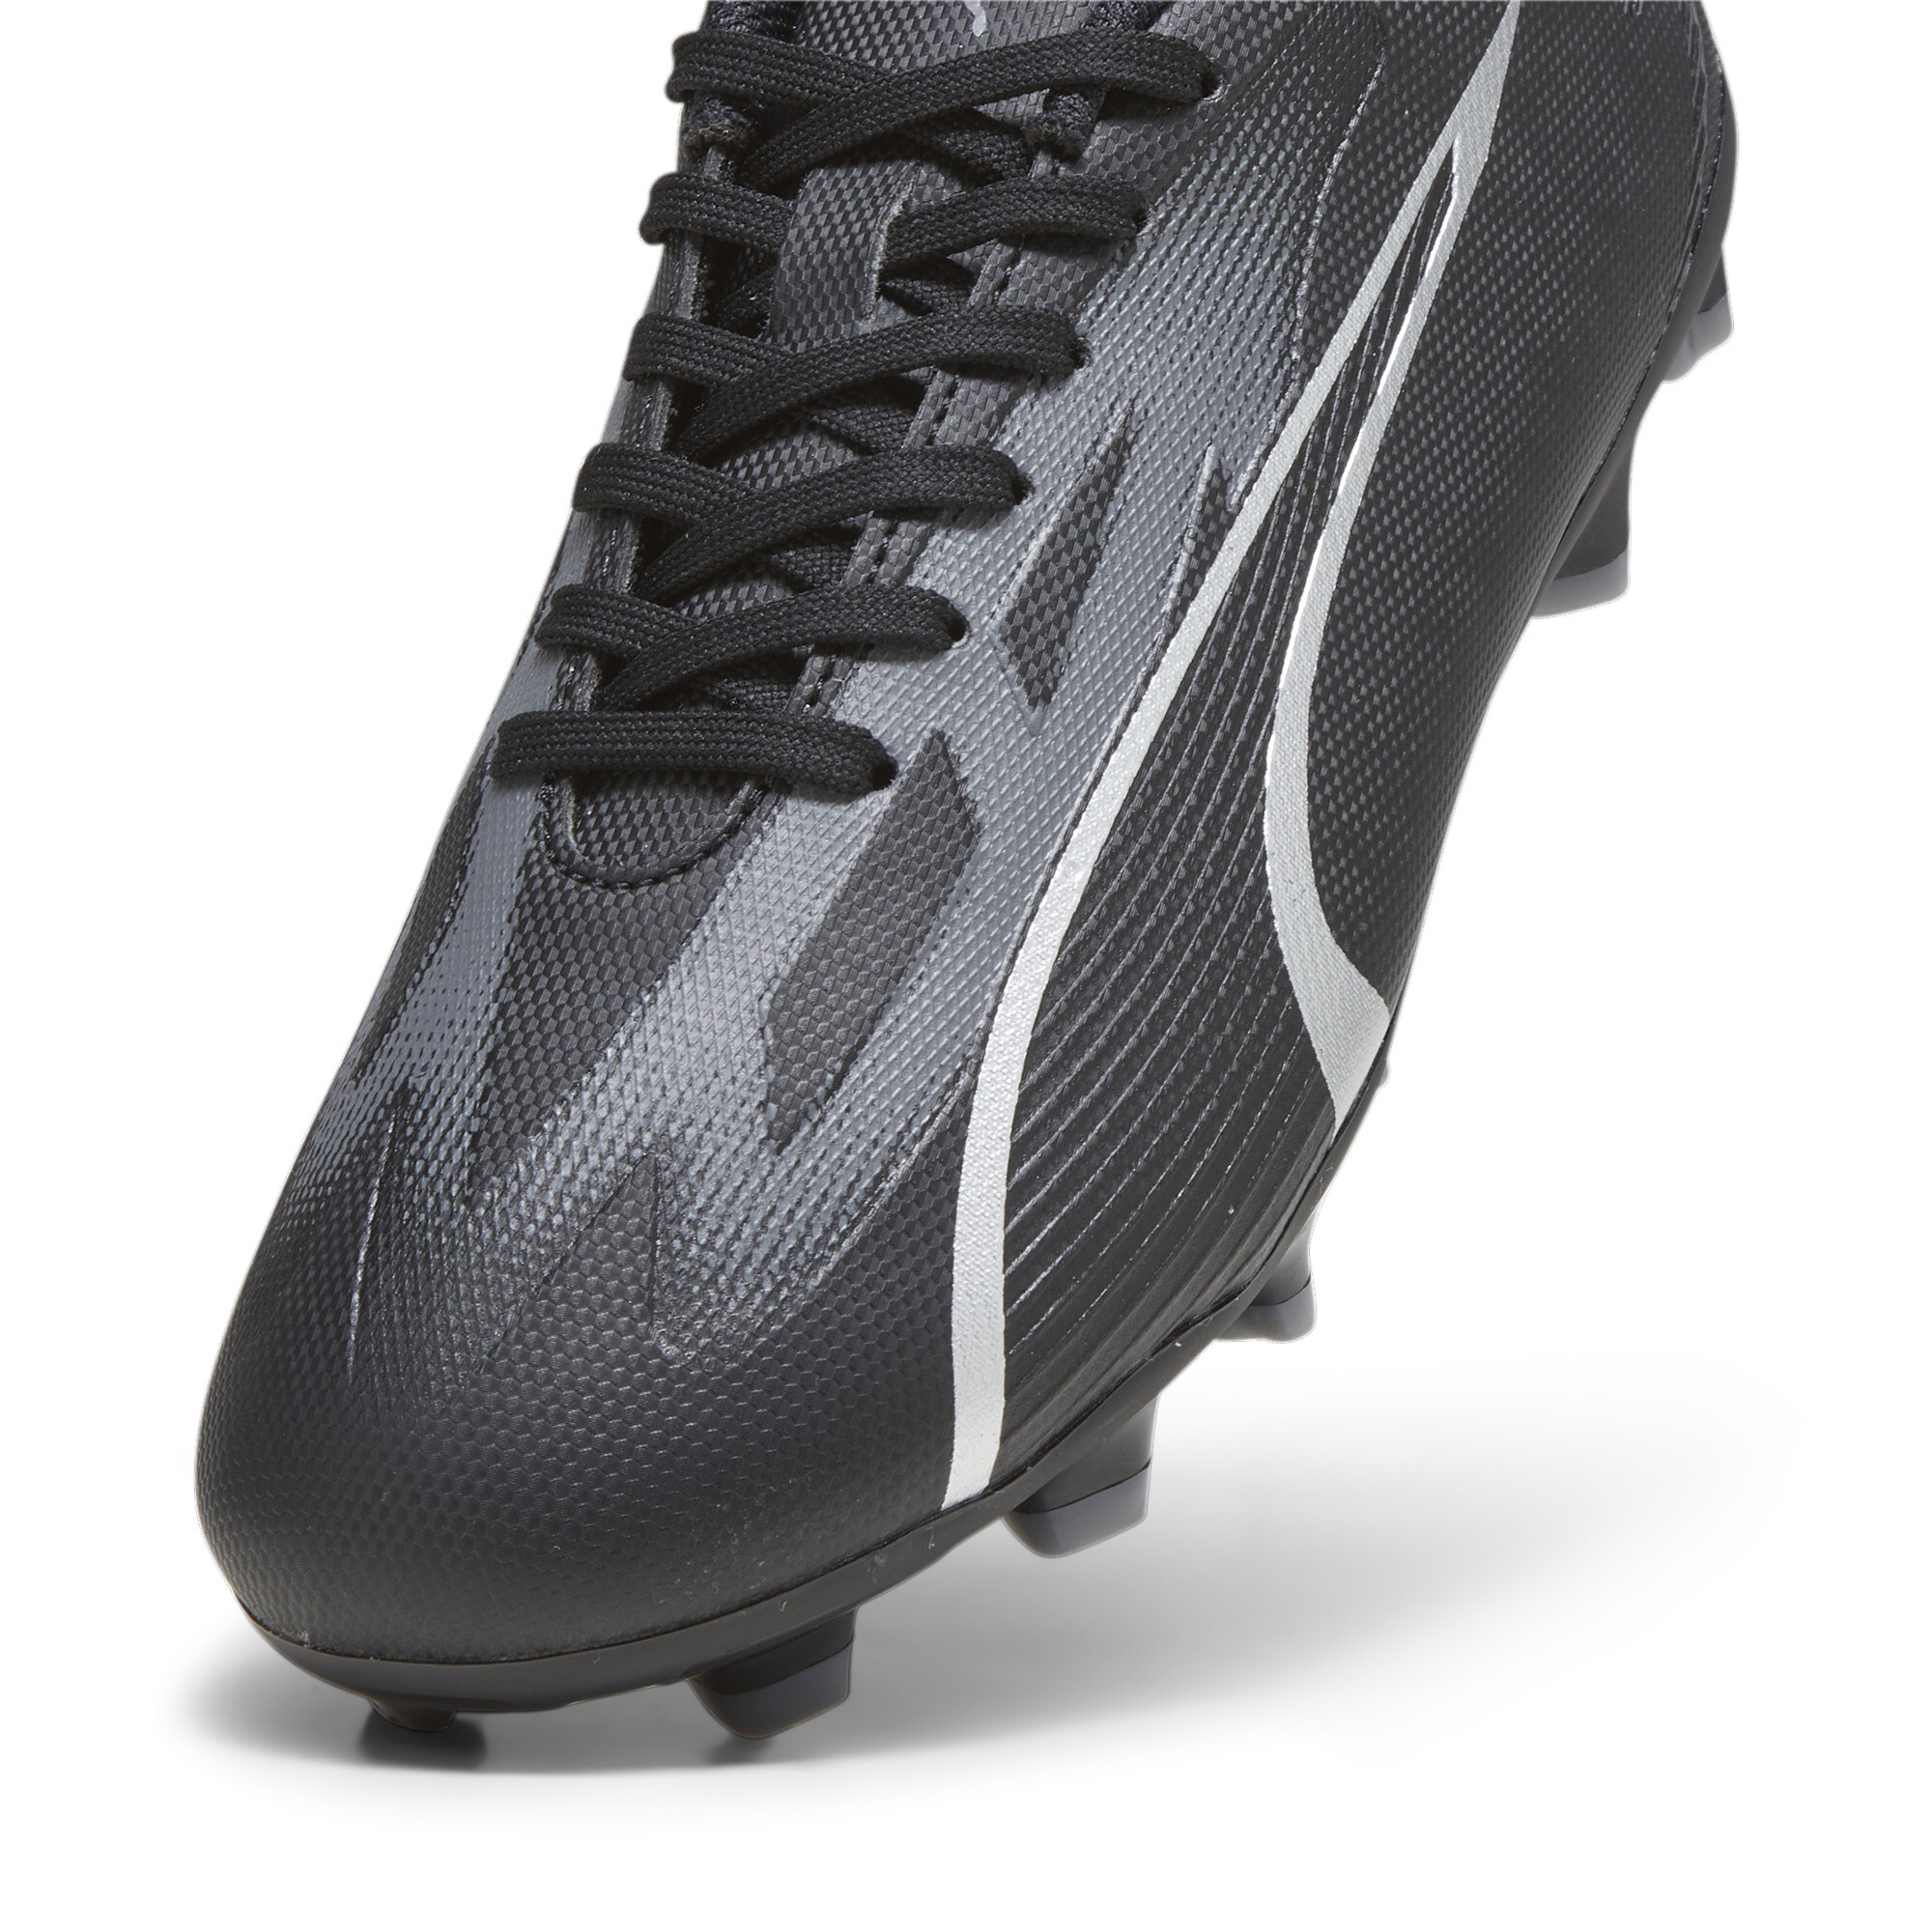 Puma ULTRA PLAY FG/AG Youth Football Boots, Black, Size 36, Shoes